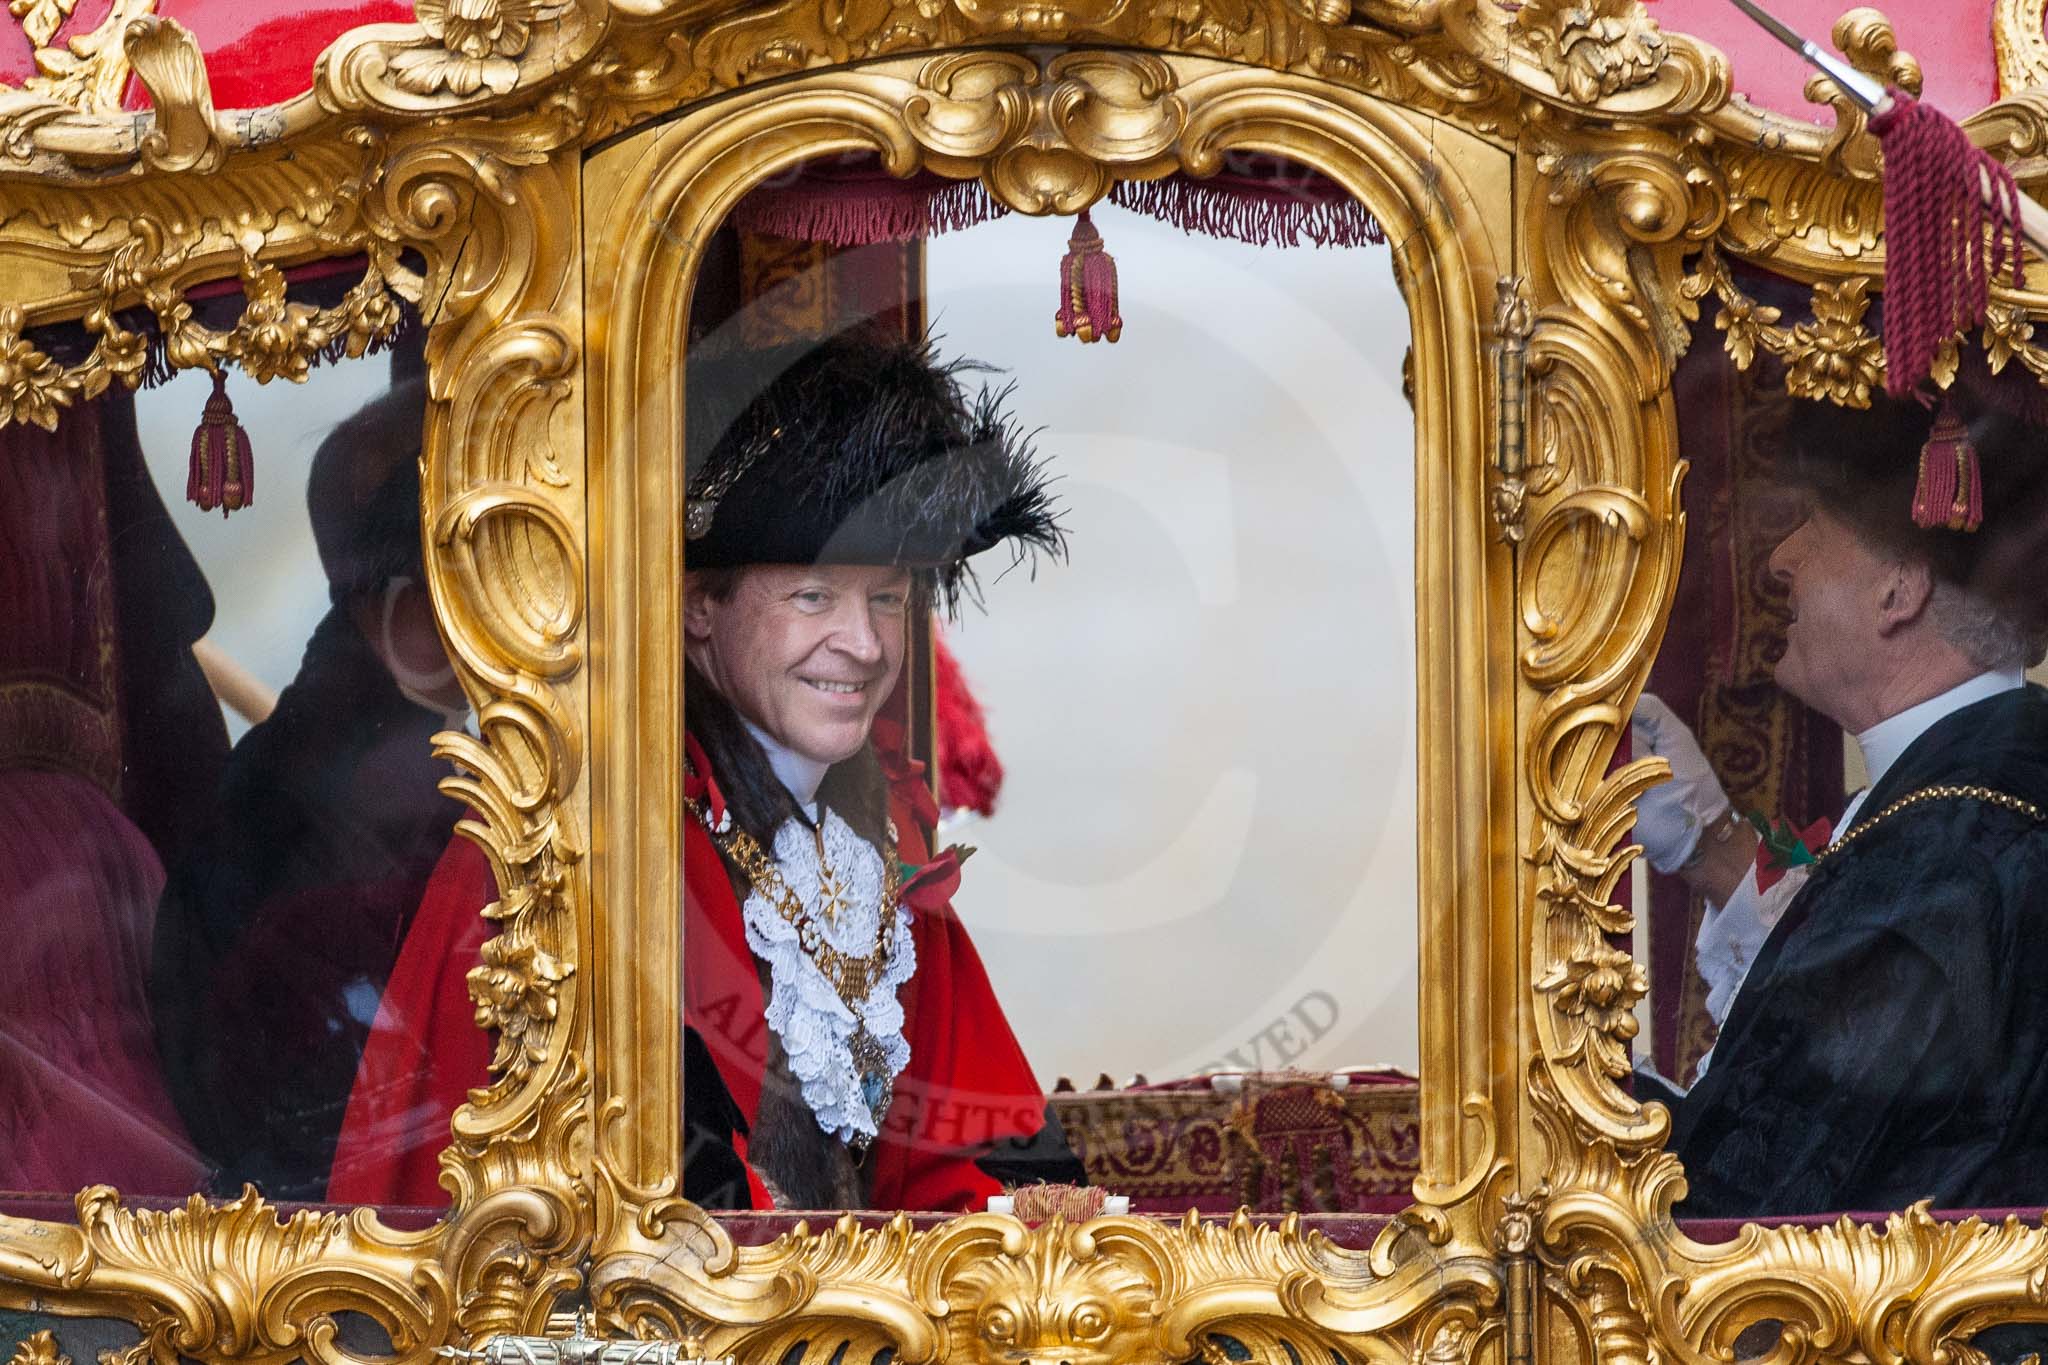 Lord Mayor's Show 2012: Lord Mayor Roger Gifford waving from his carriage as he is about to leave for St Paul's Cathedral..
Press stand opposite Mansion House, City of London,
London,
Greater London,
United Kingdom,
on 10 November 2012 at 12:12, image #1948